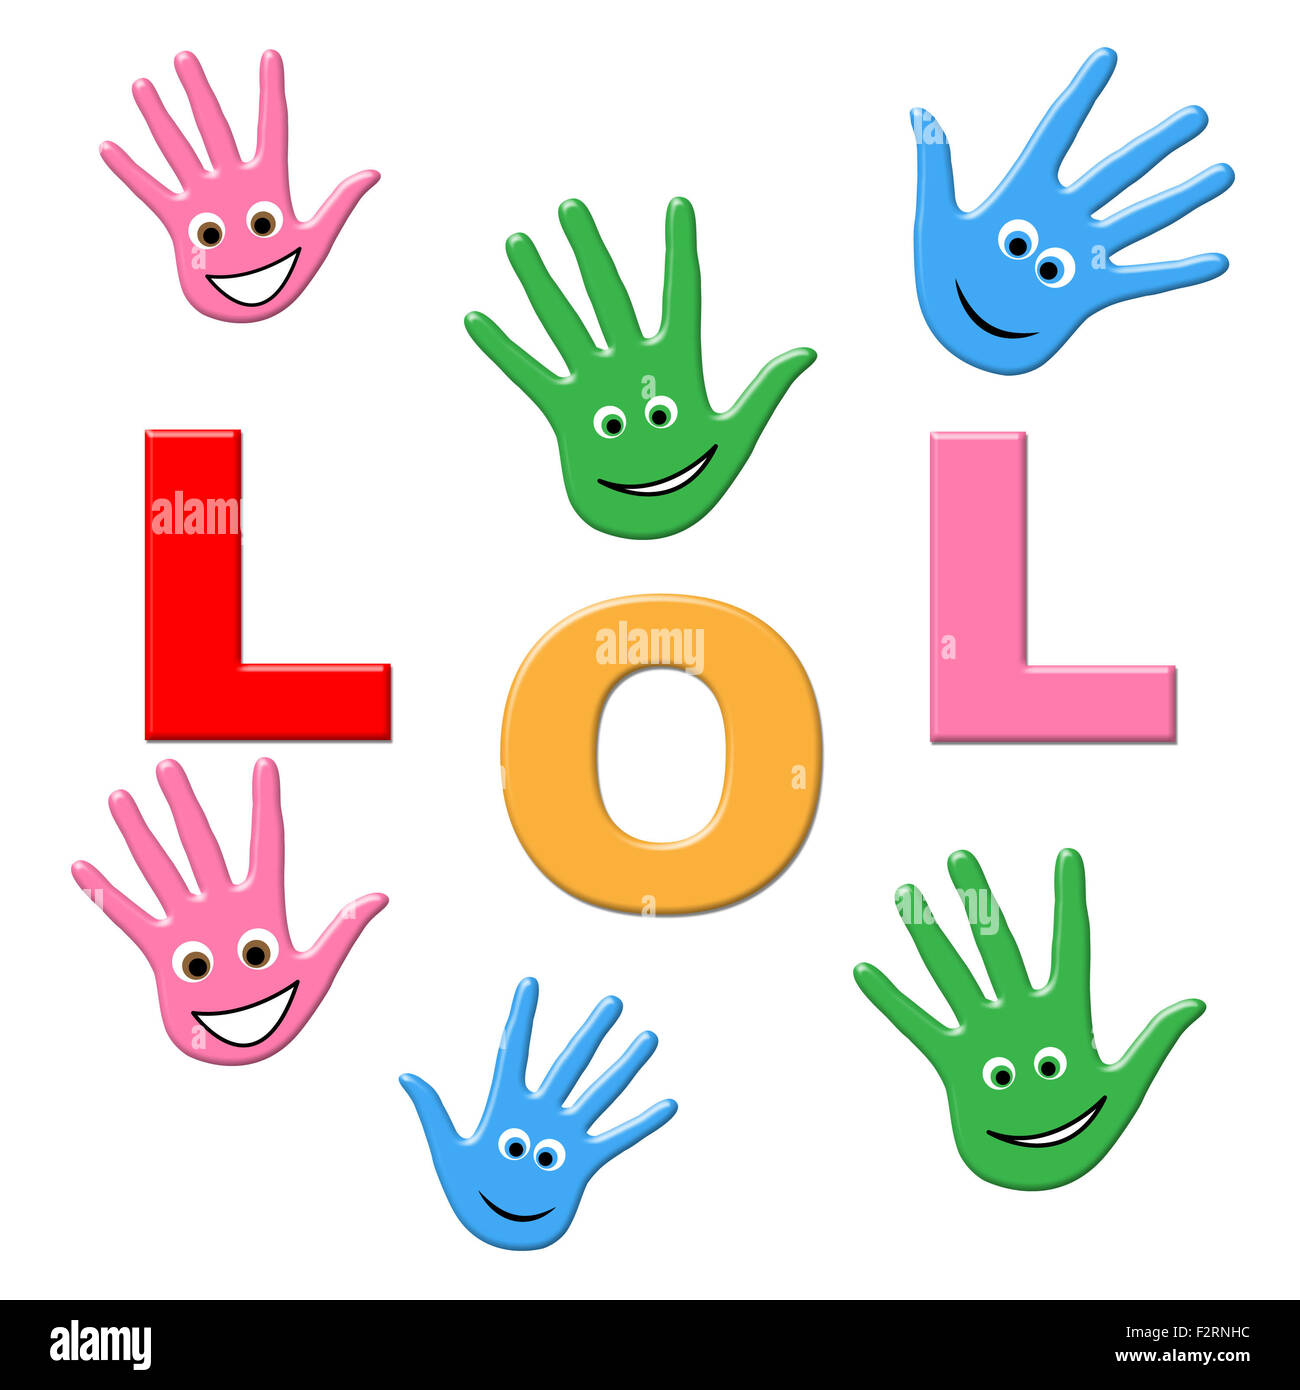 Kids Laugh Meaning Laughing Out Loud And Children Stock Photo